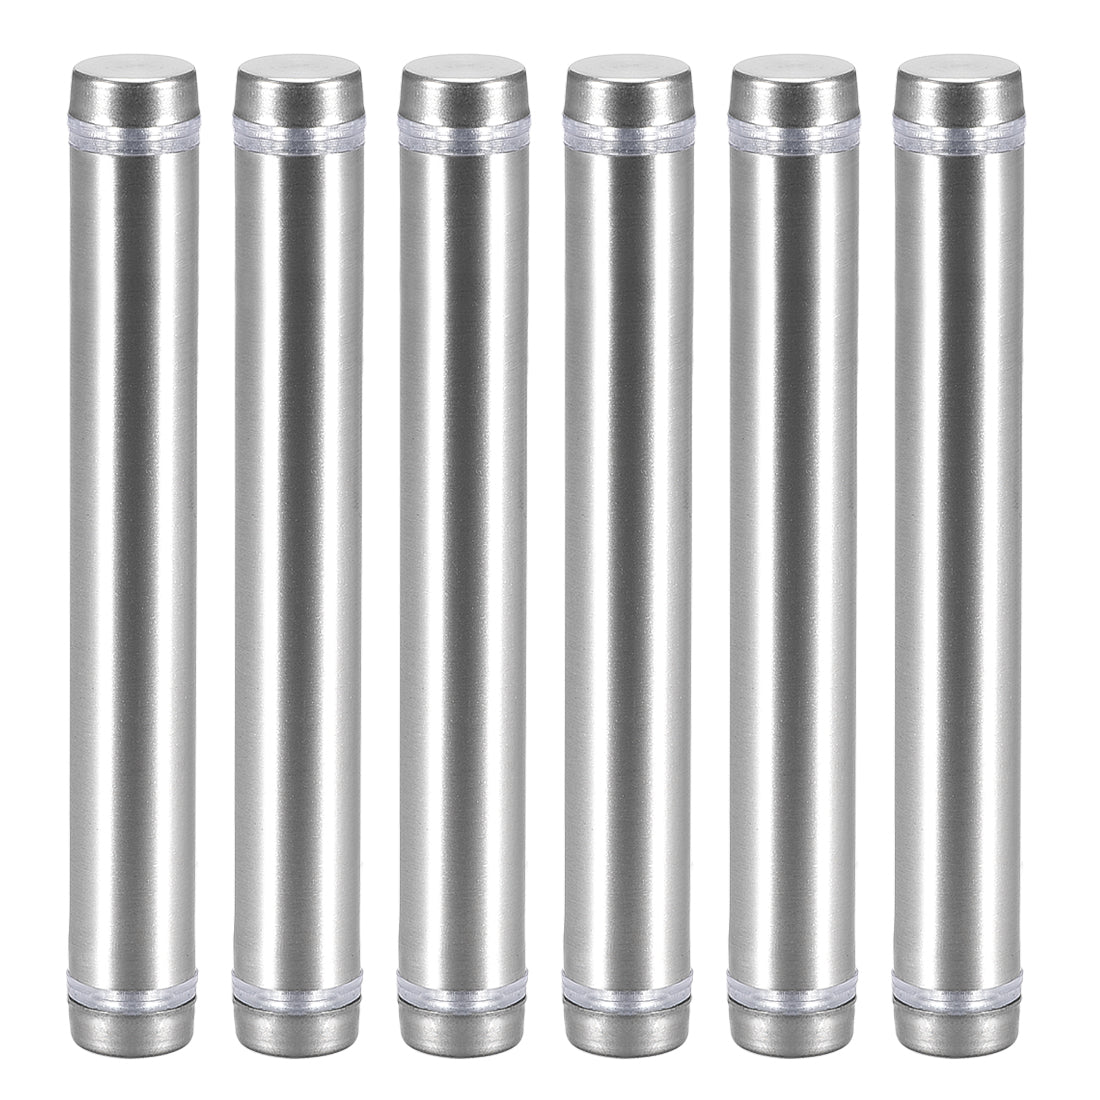 uxcell Uxcell Glass Standoff Double Head Stainless Steel Standoff Holder 12mm x 94mm 6 Pcs